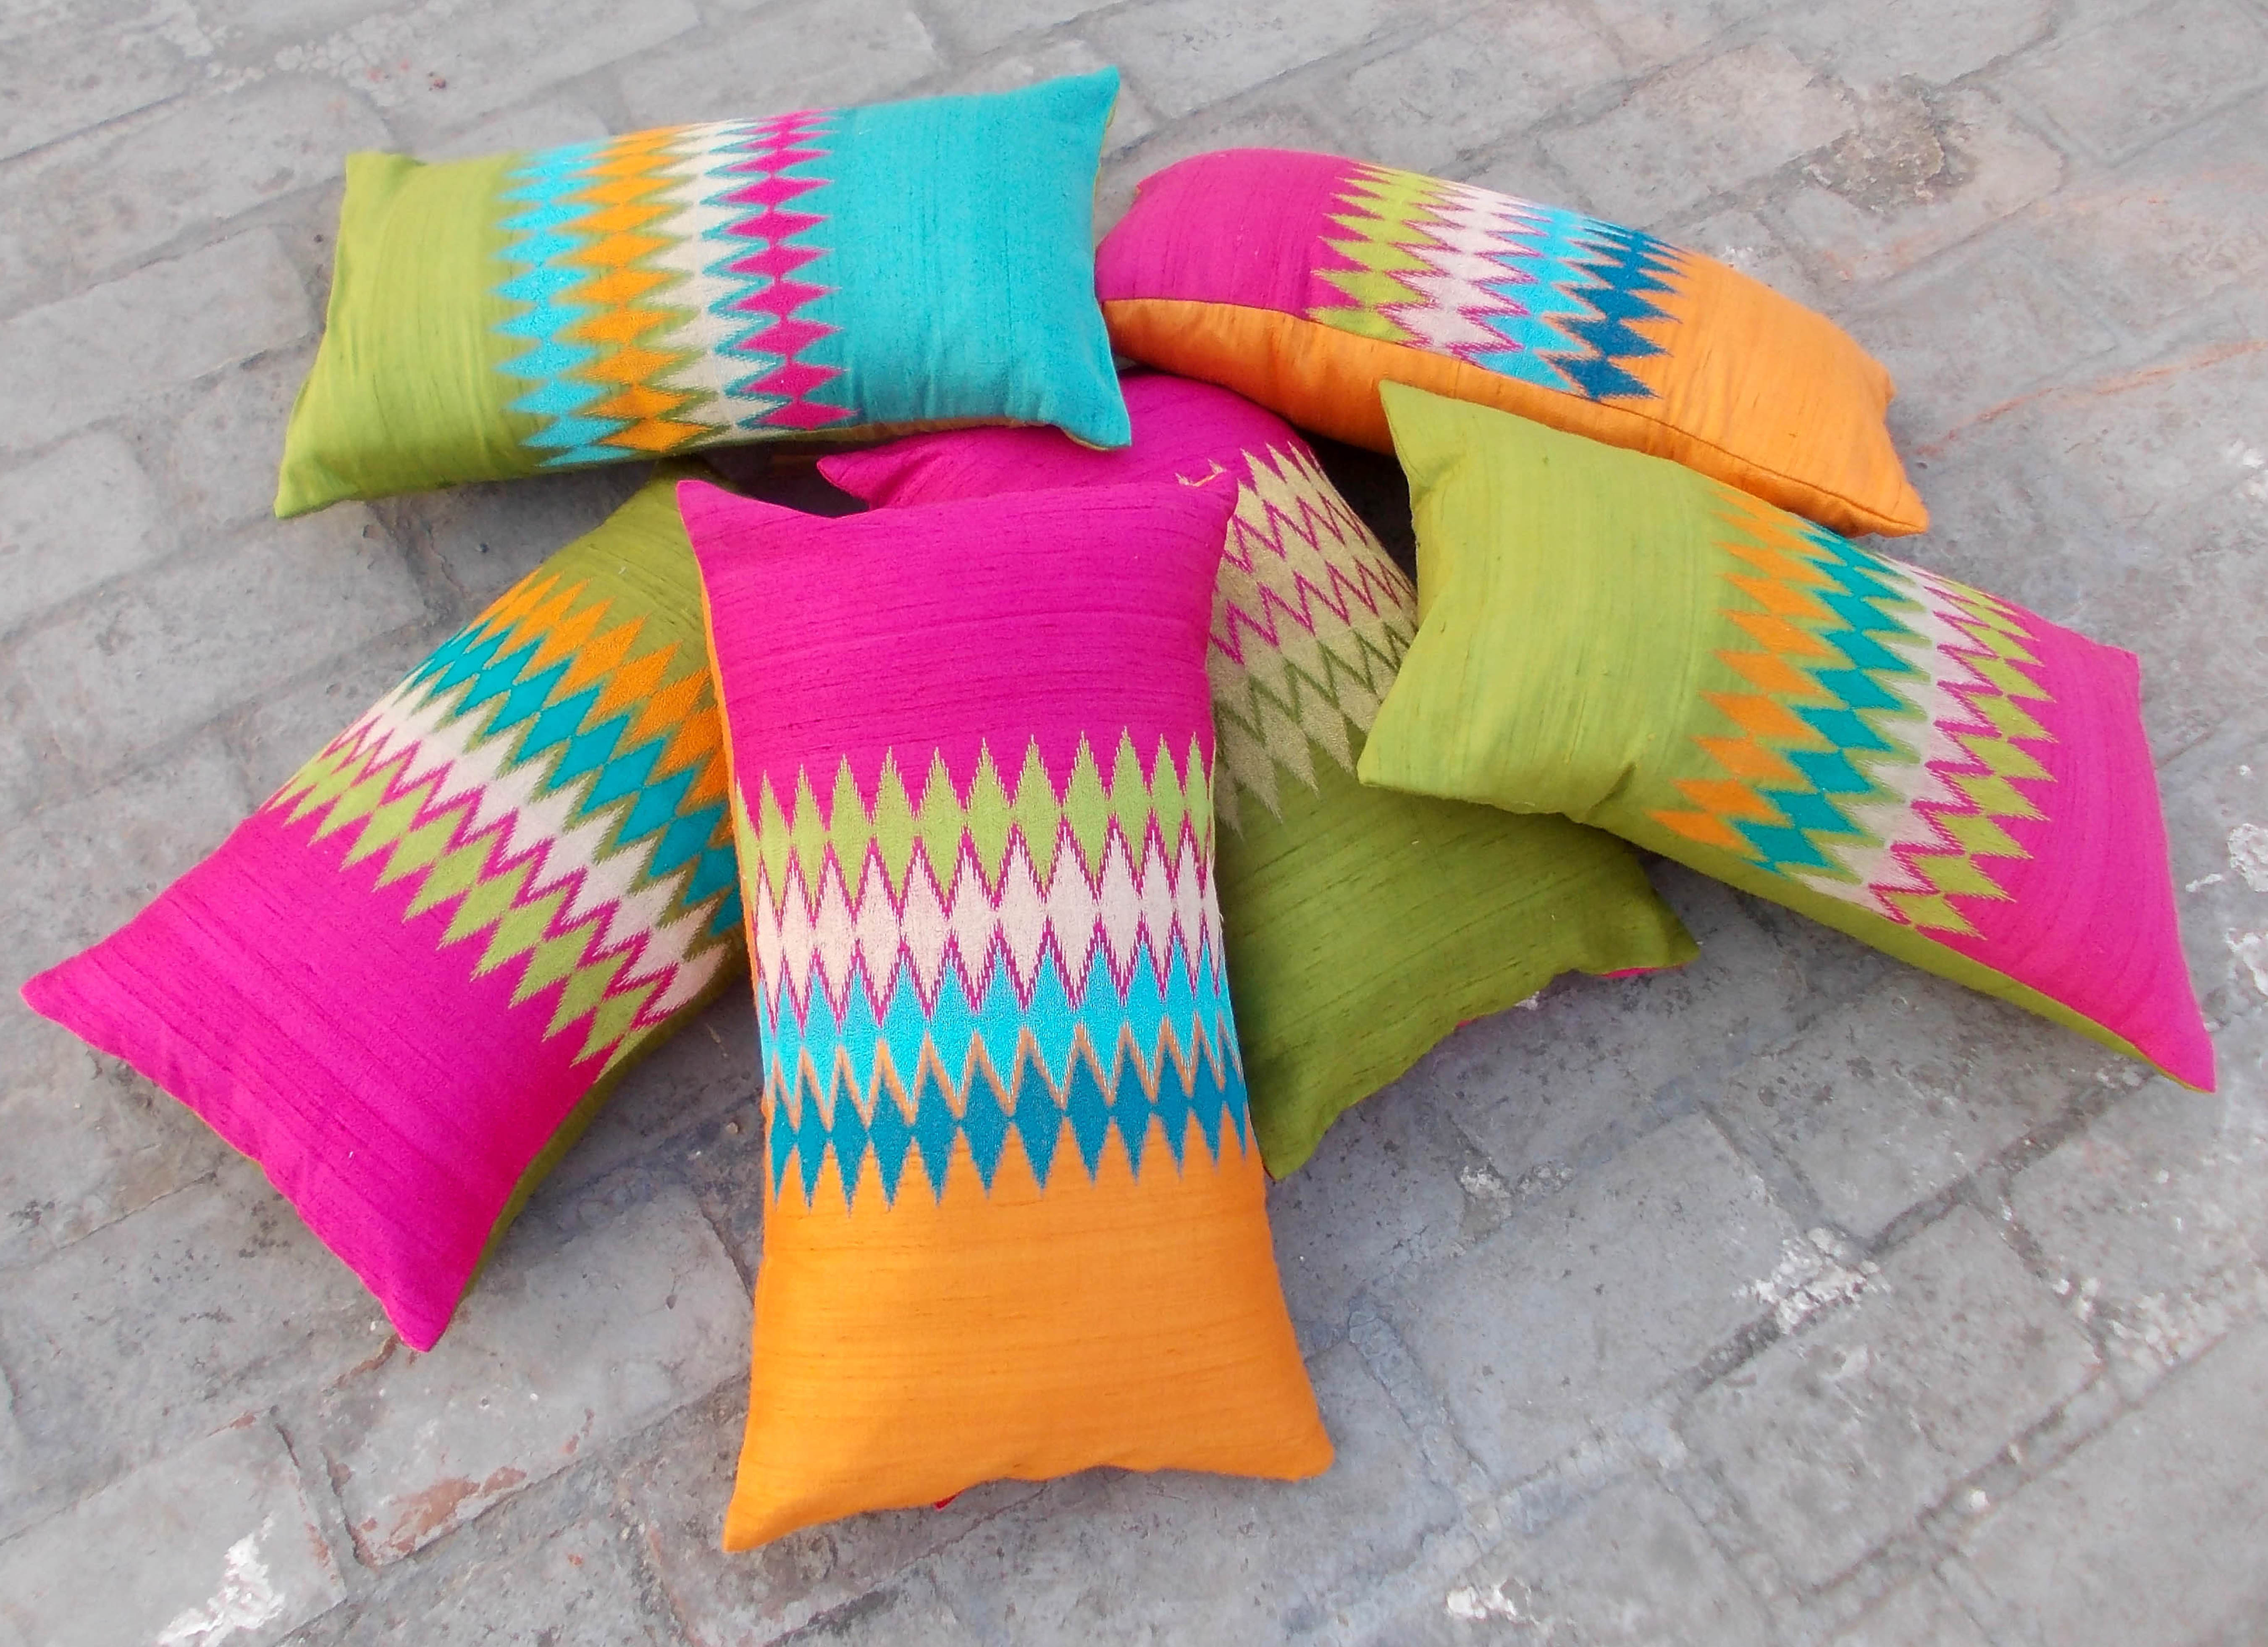 Cushion covers from VLiving